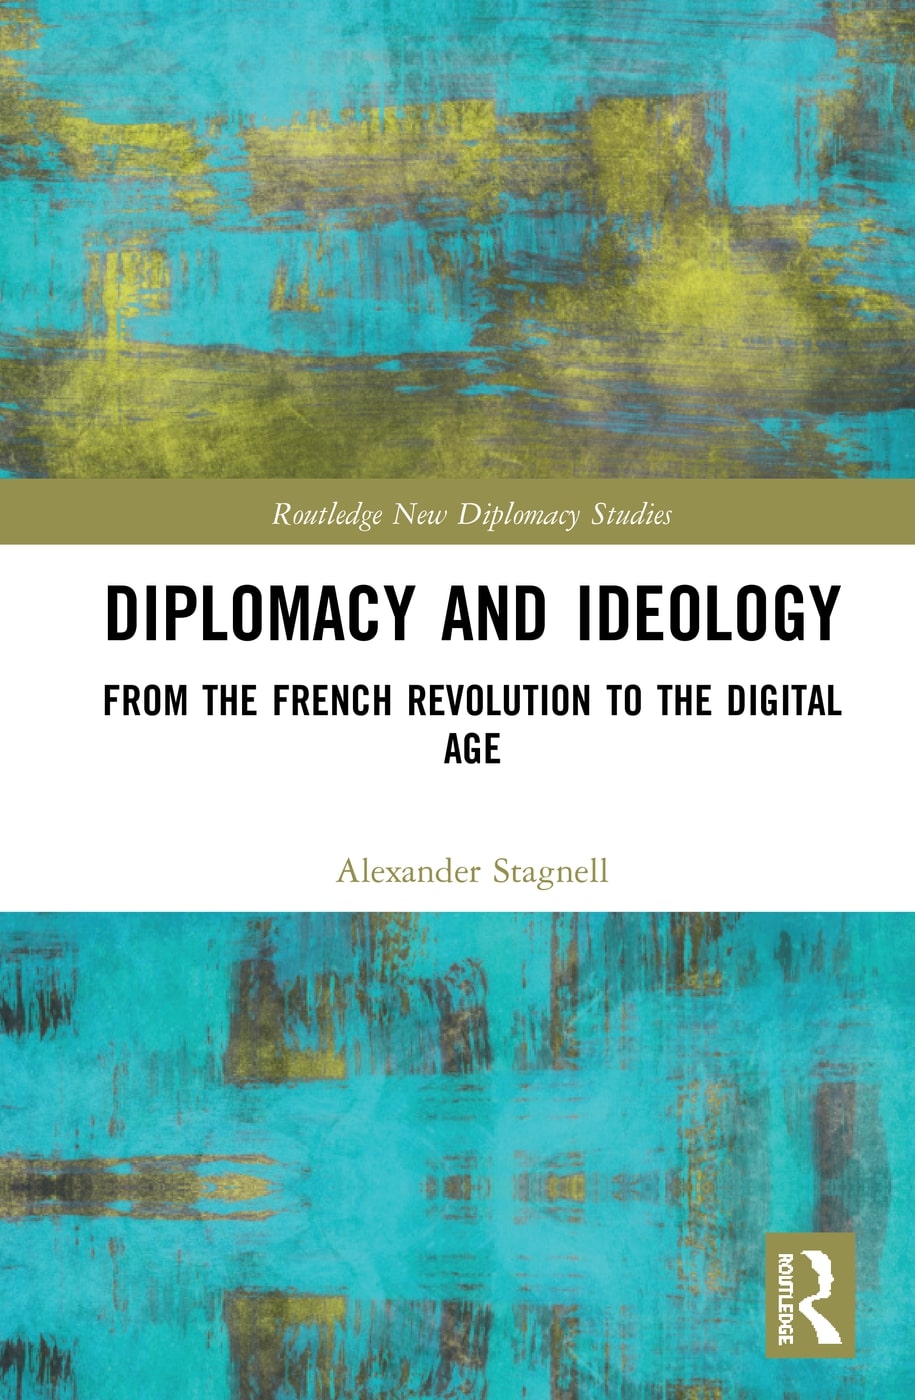 Diplomacy and Ideology on Sale Until May 1